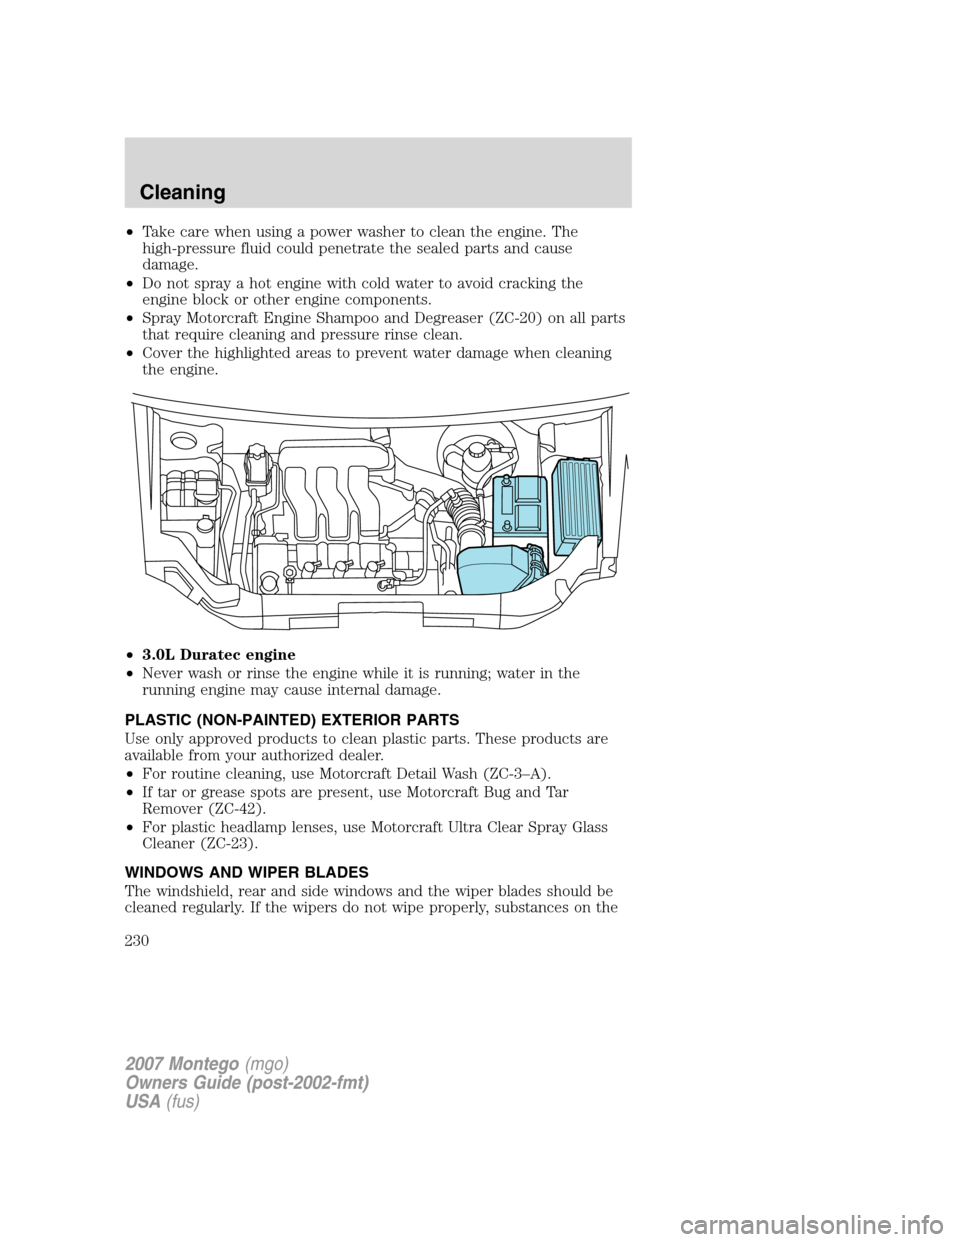 Mercury Montego 2007  Owners Manuals •Take care when using a power washer to clean the engine. The
high-pressure fluid could penetrate the sealed parts and cause
damage.
•Do not spray a hot engine with cold water to avoid cracking th